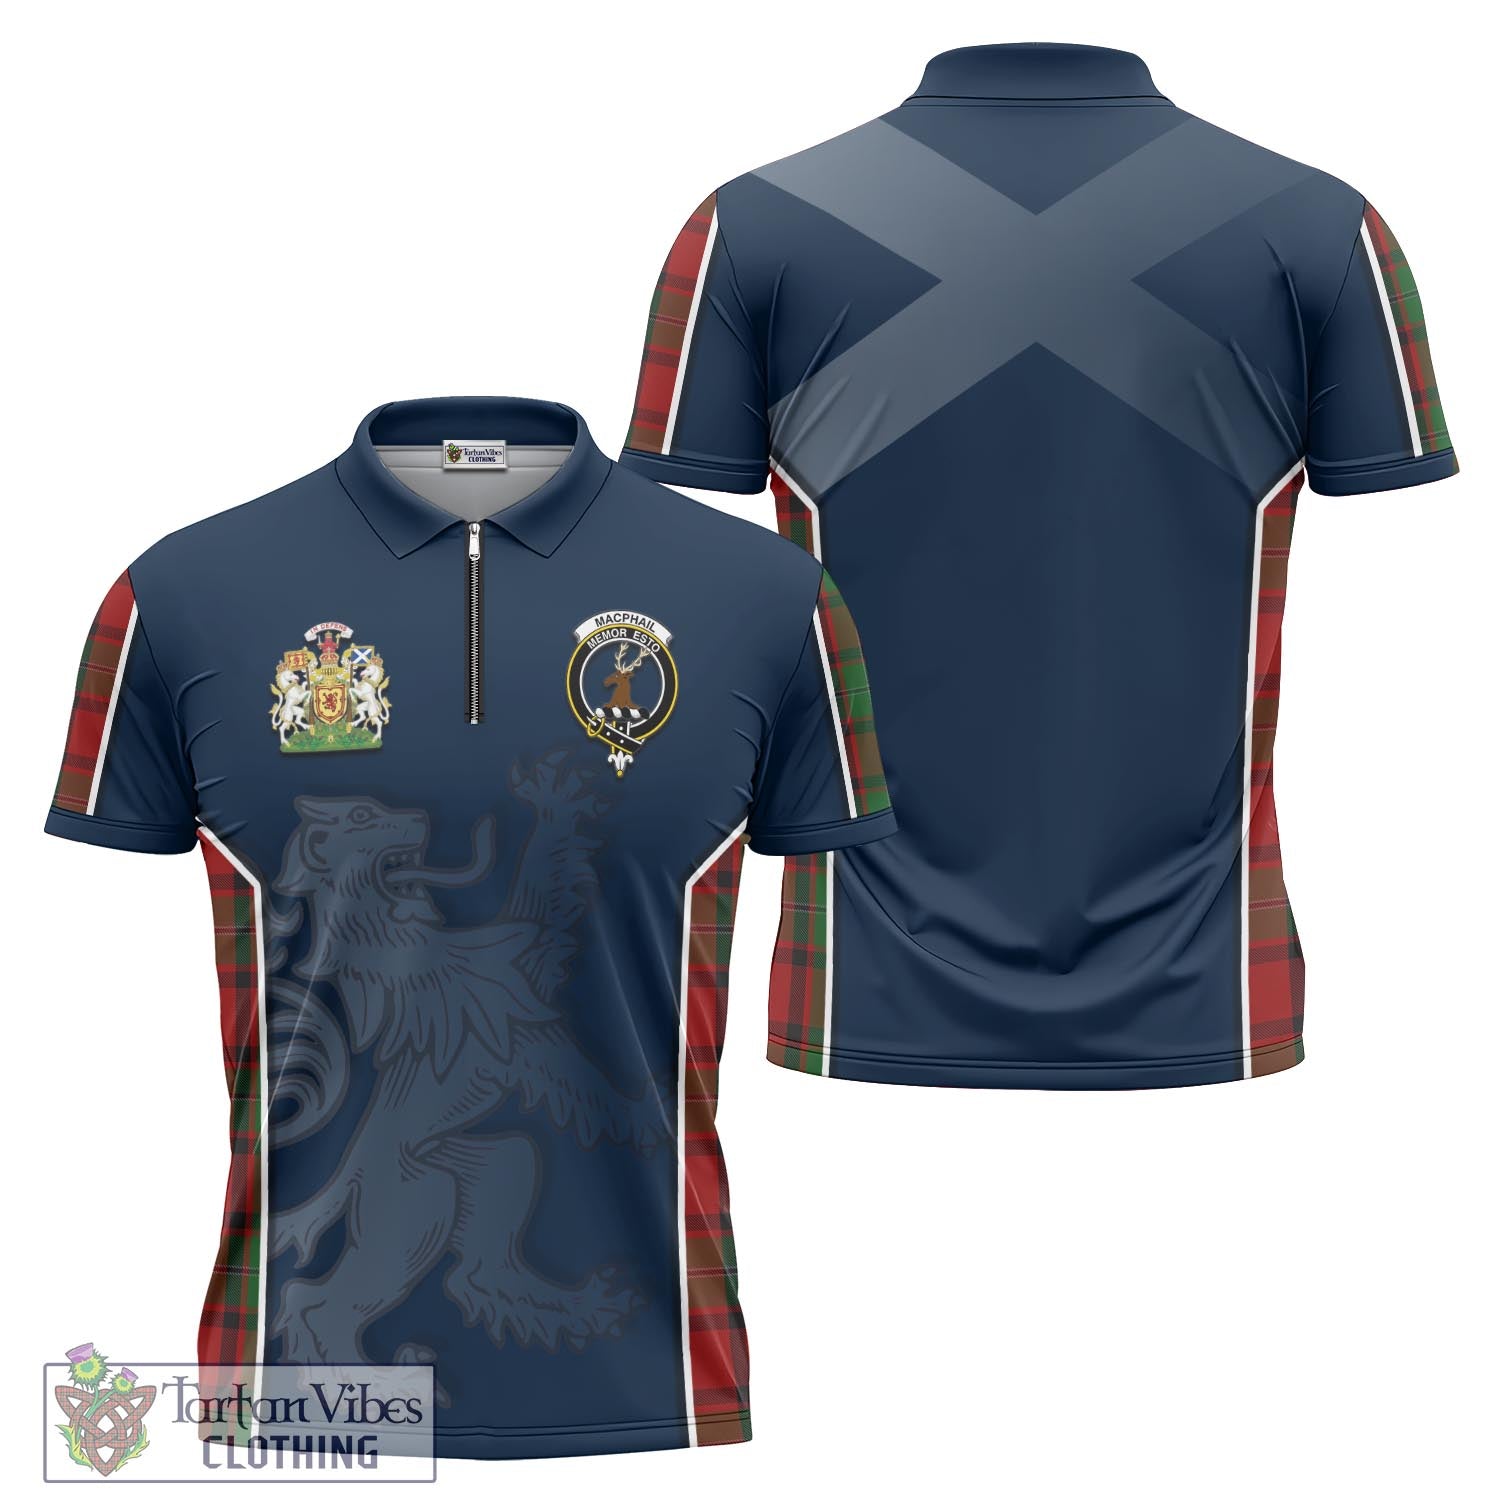 Tartan Vibes Clothing MacPhail Tartan Zipper Polo Shirt with Family Crest and Lion Rampant Vibes Sport Style